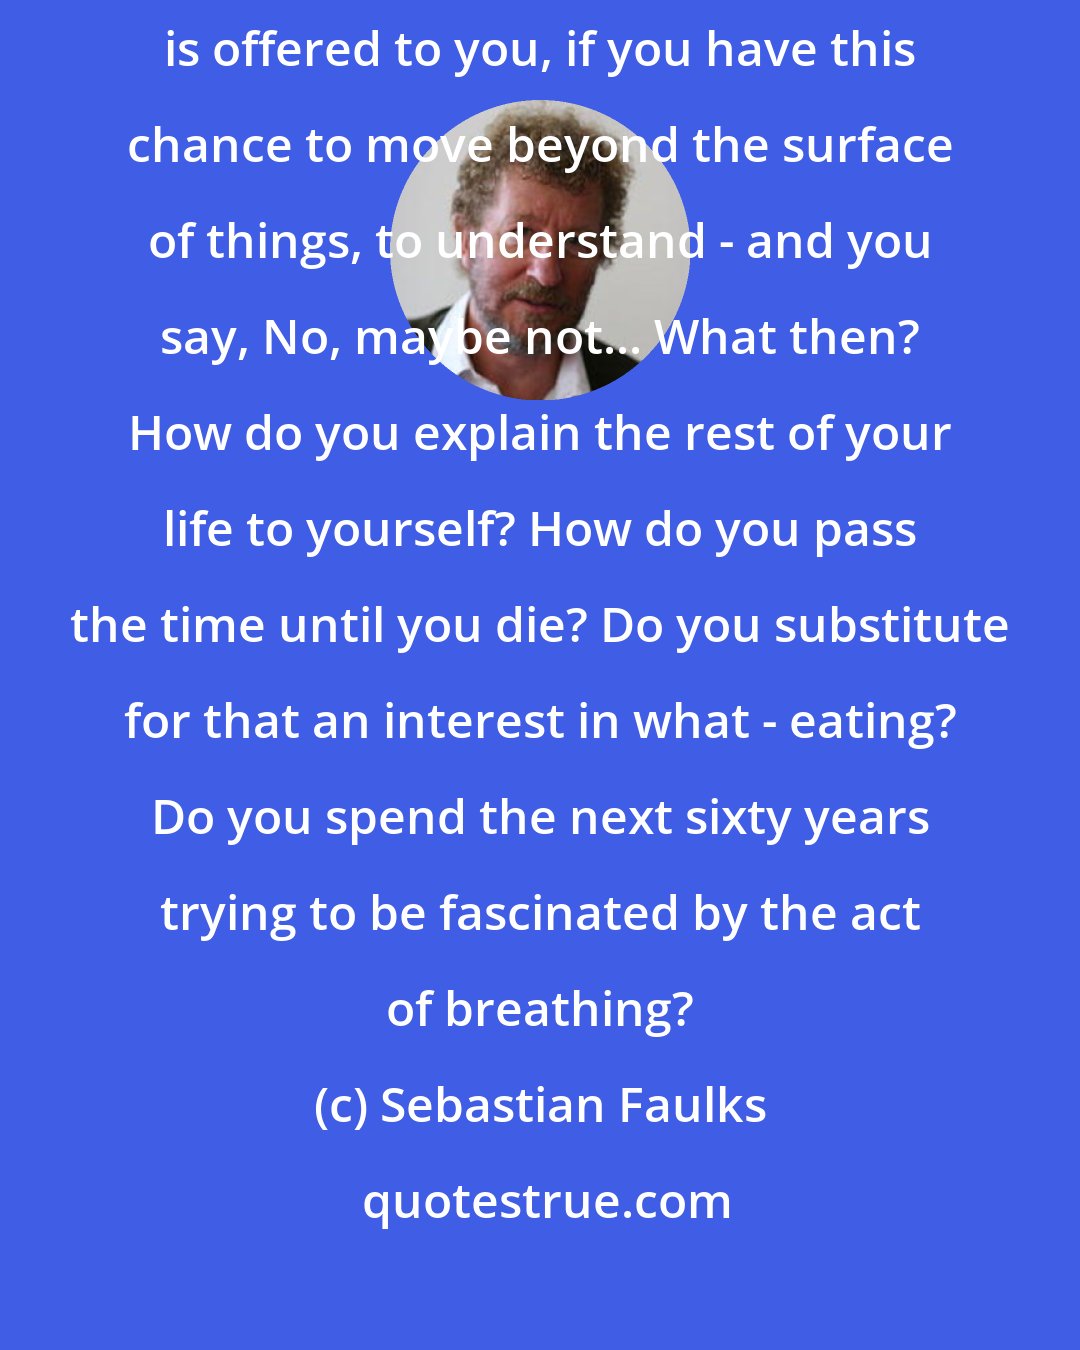 Sebastian Faulks: If at the one moment in your life when the chance of something transcendental is offered to you, if you have this chance to move beyond the surface of things, to understand - and you say, No, maybe not... What then? How do you explain the rest of your life to yourself? How do you pass the time until you die? Do you substitute for that an interest in what - eating? Do you spend the next sixty years trying to be fascinated by the act of breathing?